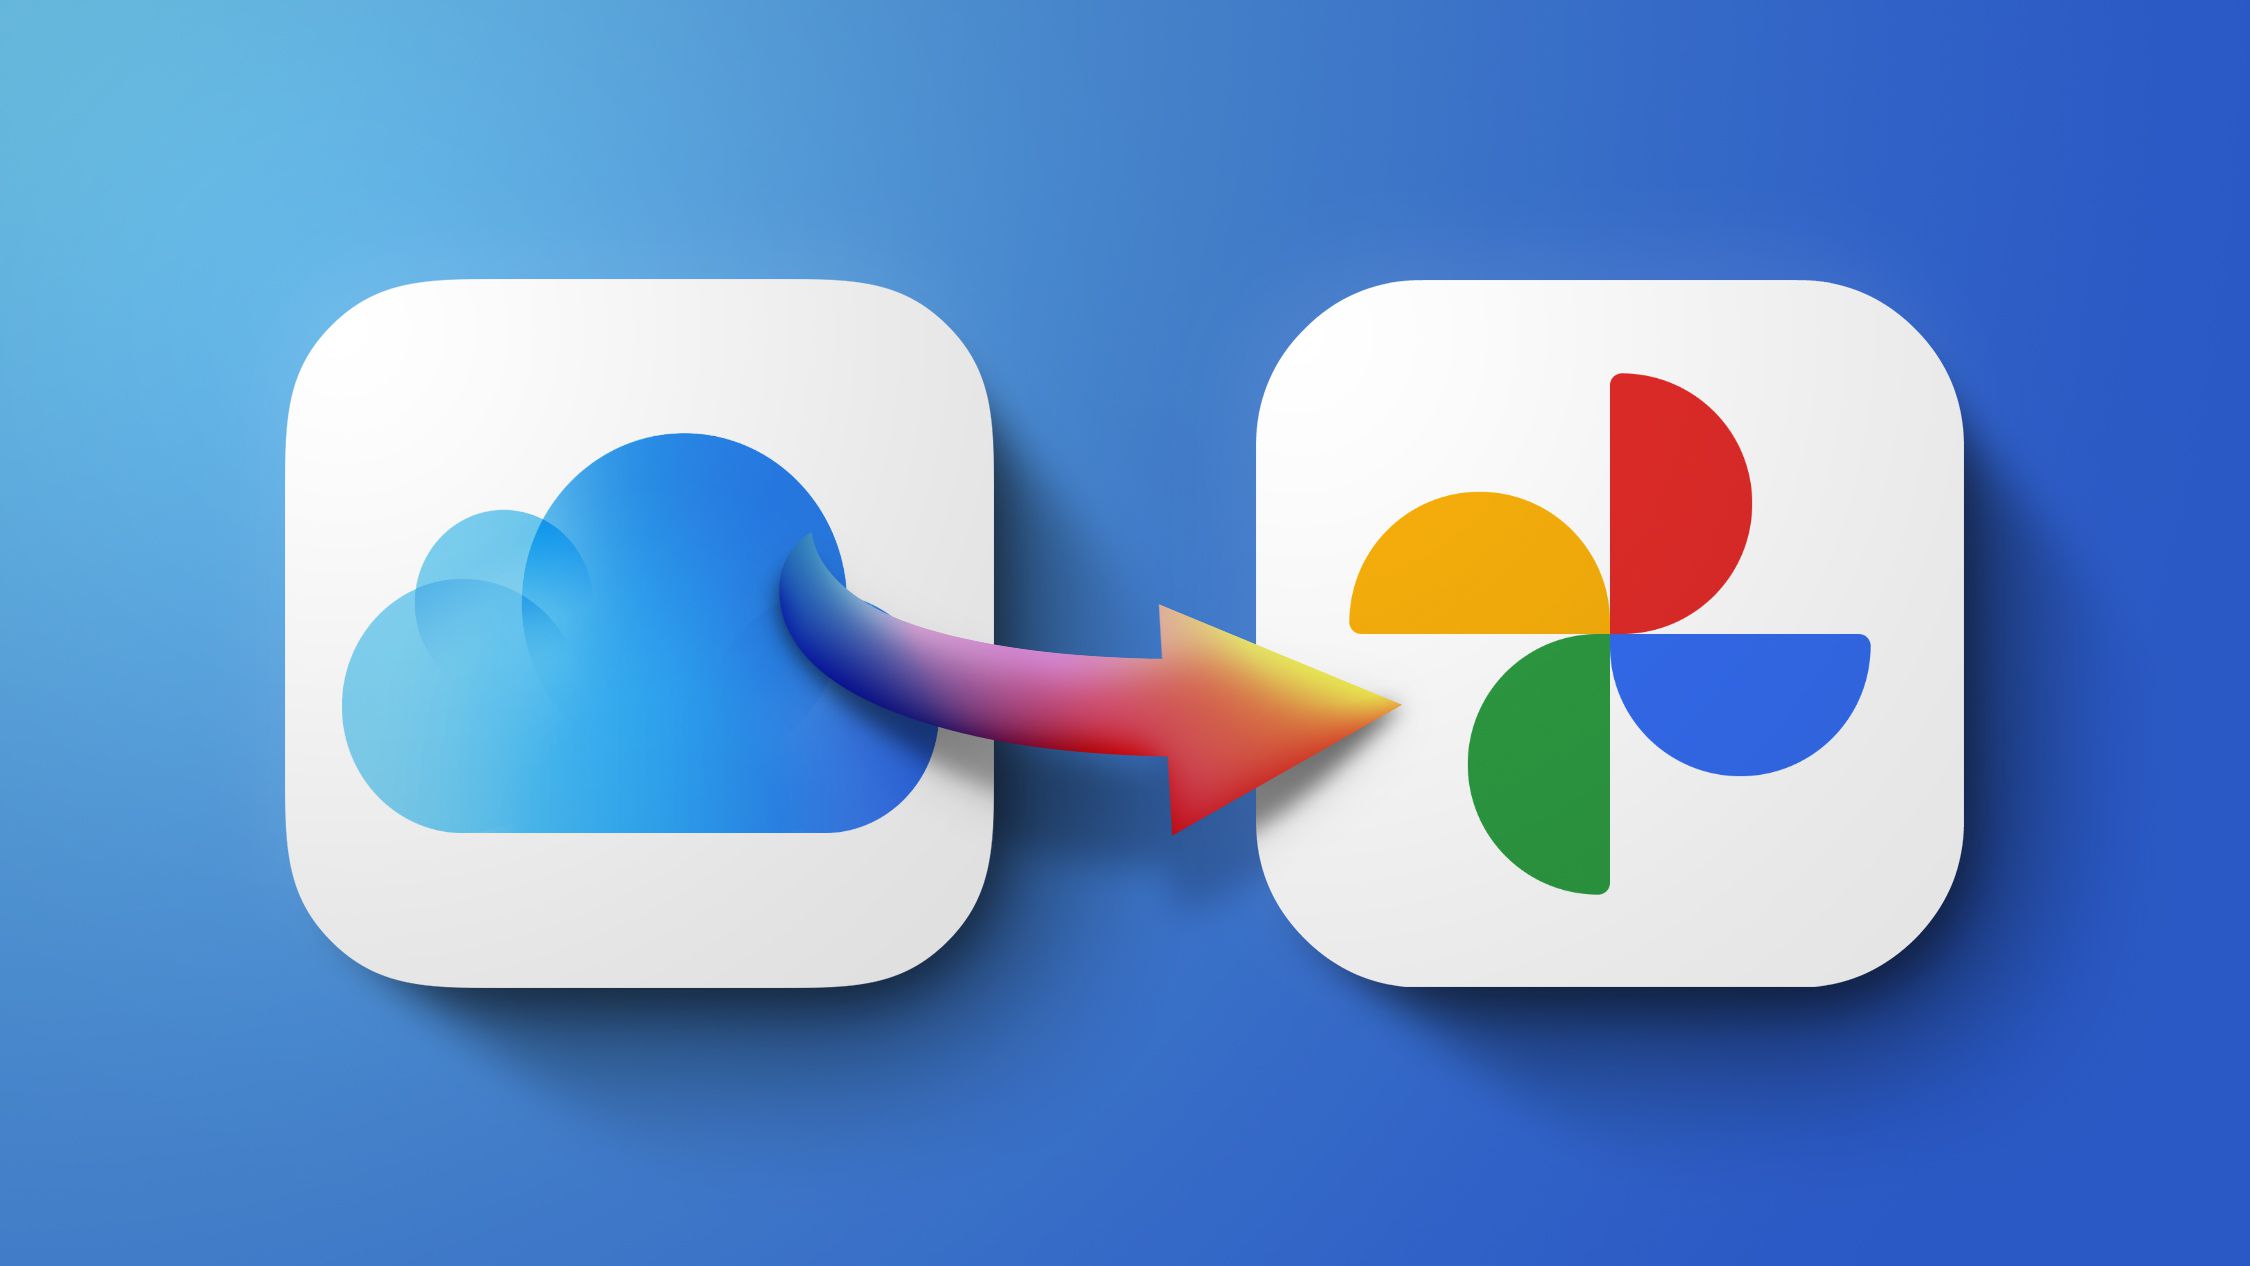 Apple launches service to transfer photos and videos from iCloud to Google Photos